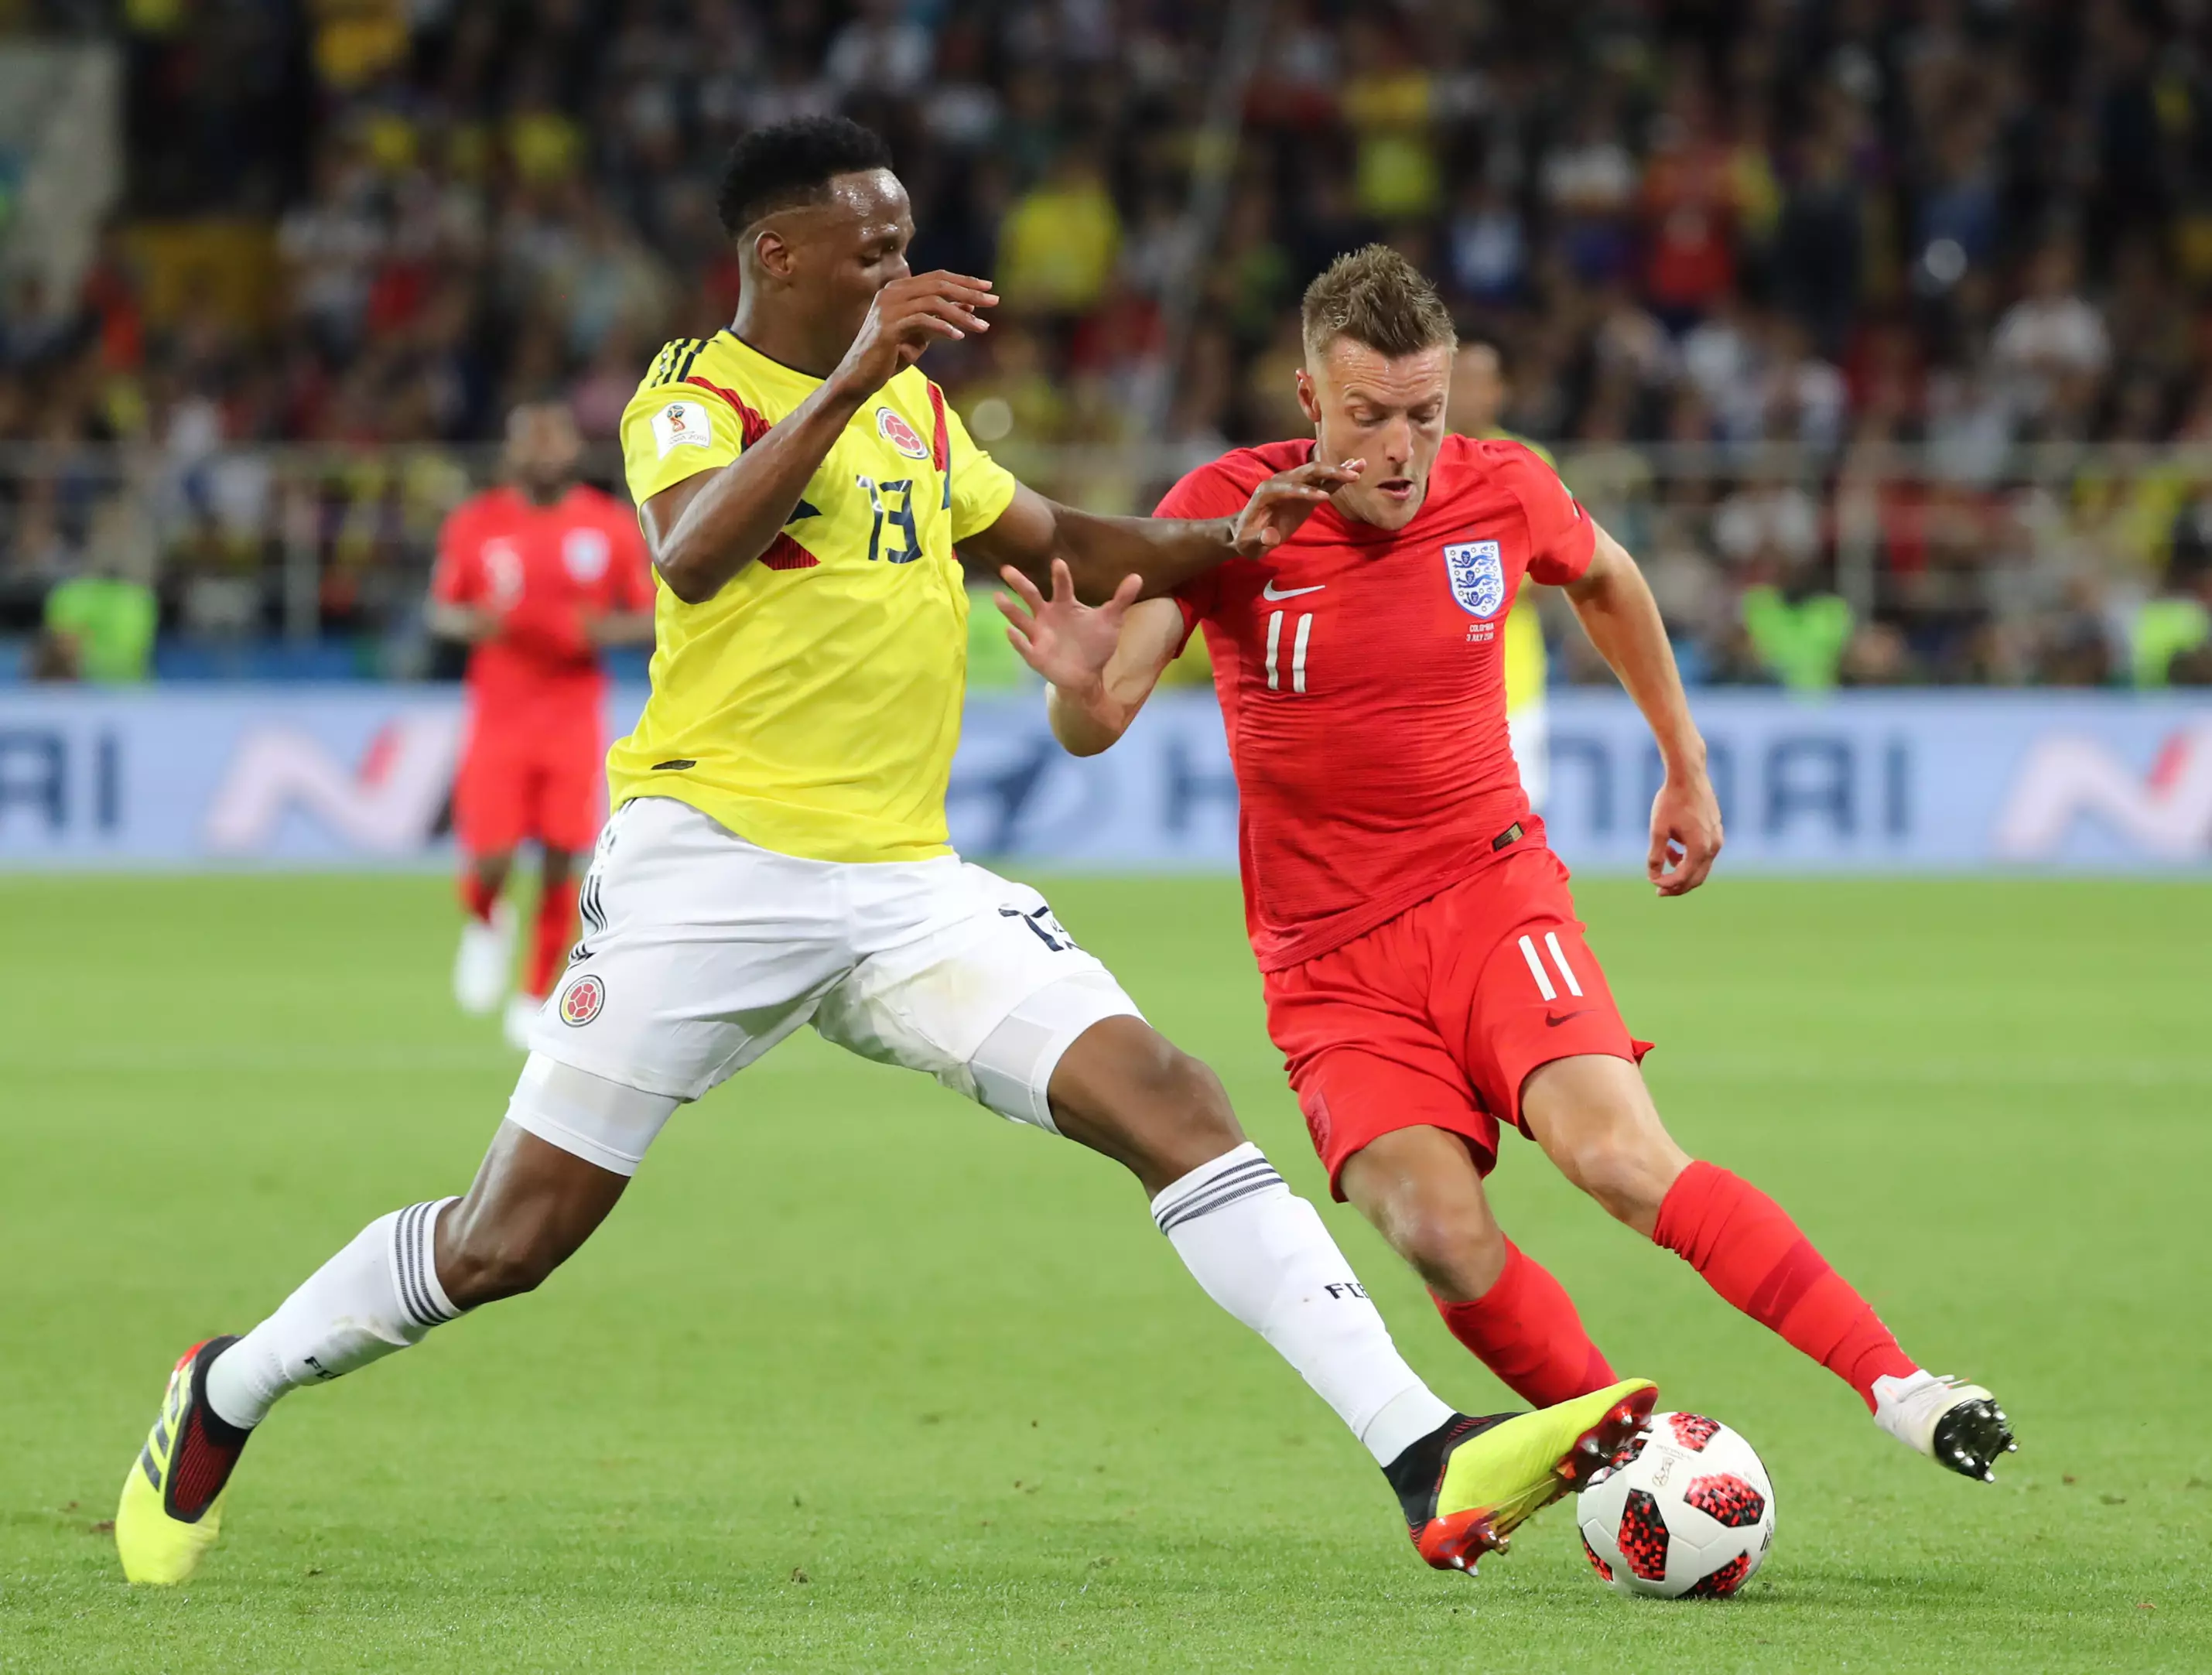 Vardy didn't have much luck against Colombia. Image: PA Images